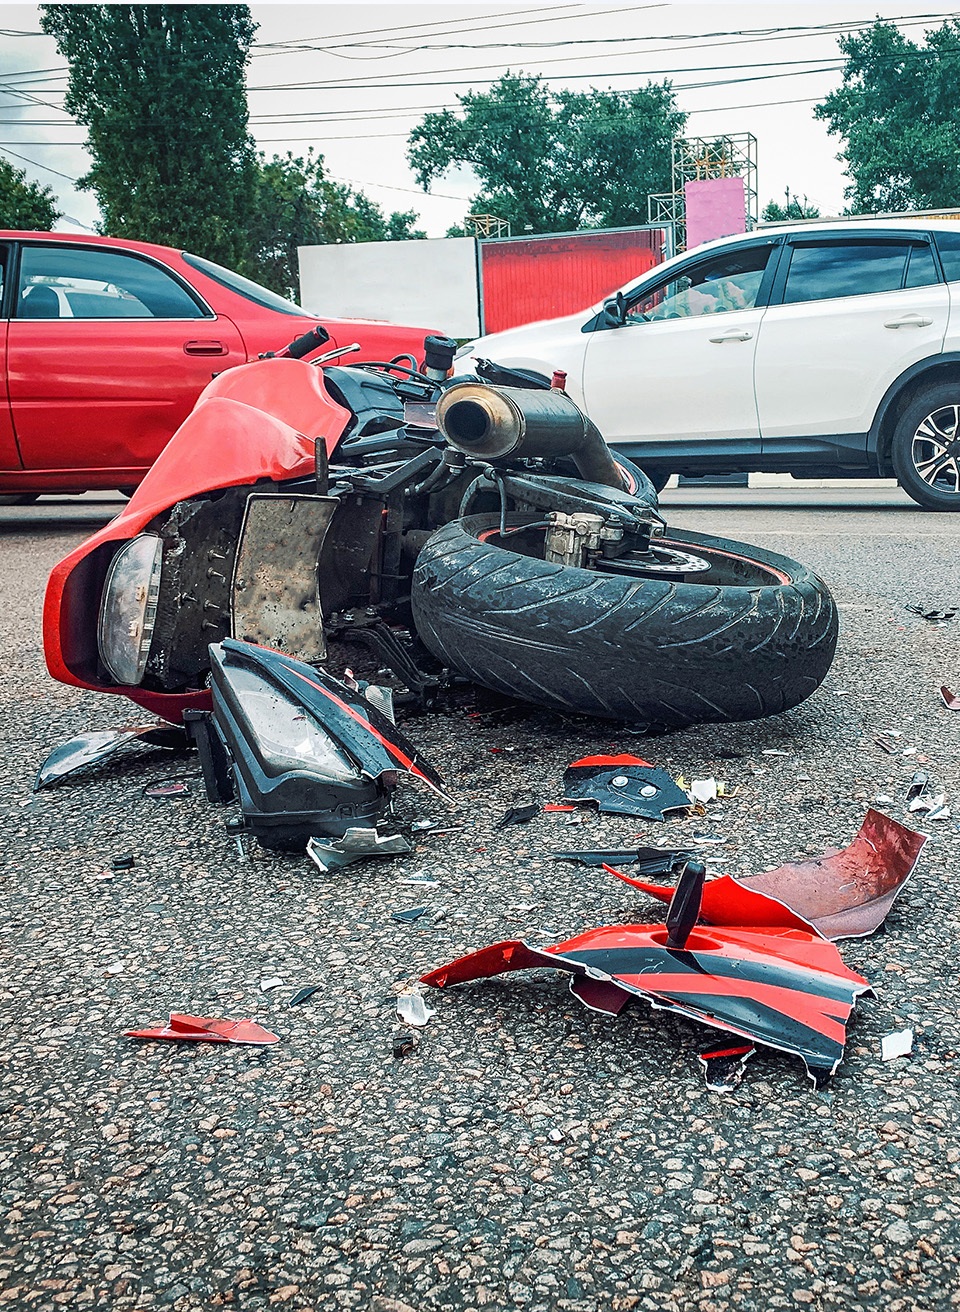 A red crashed motorcycle on its side in the street with pieces of it strewn about.